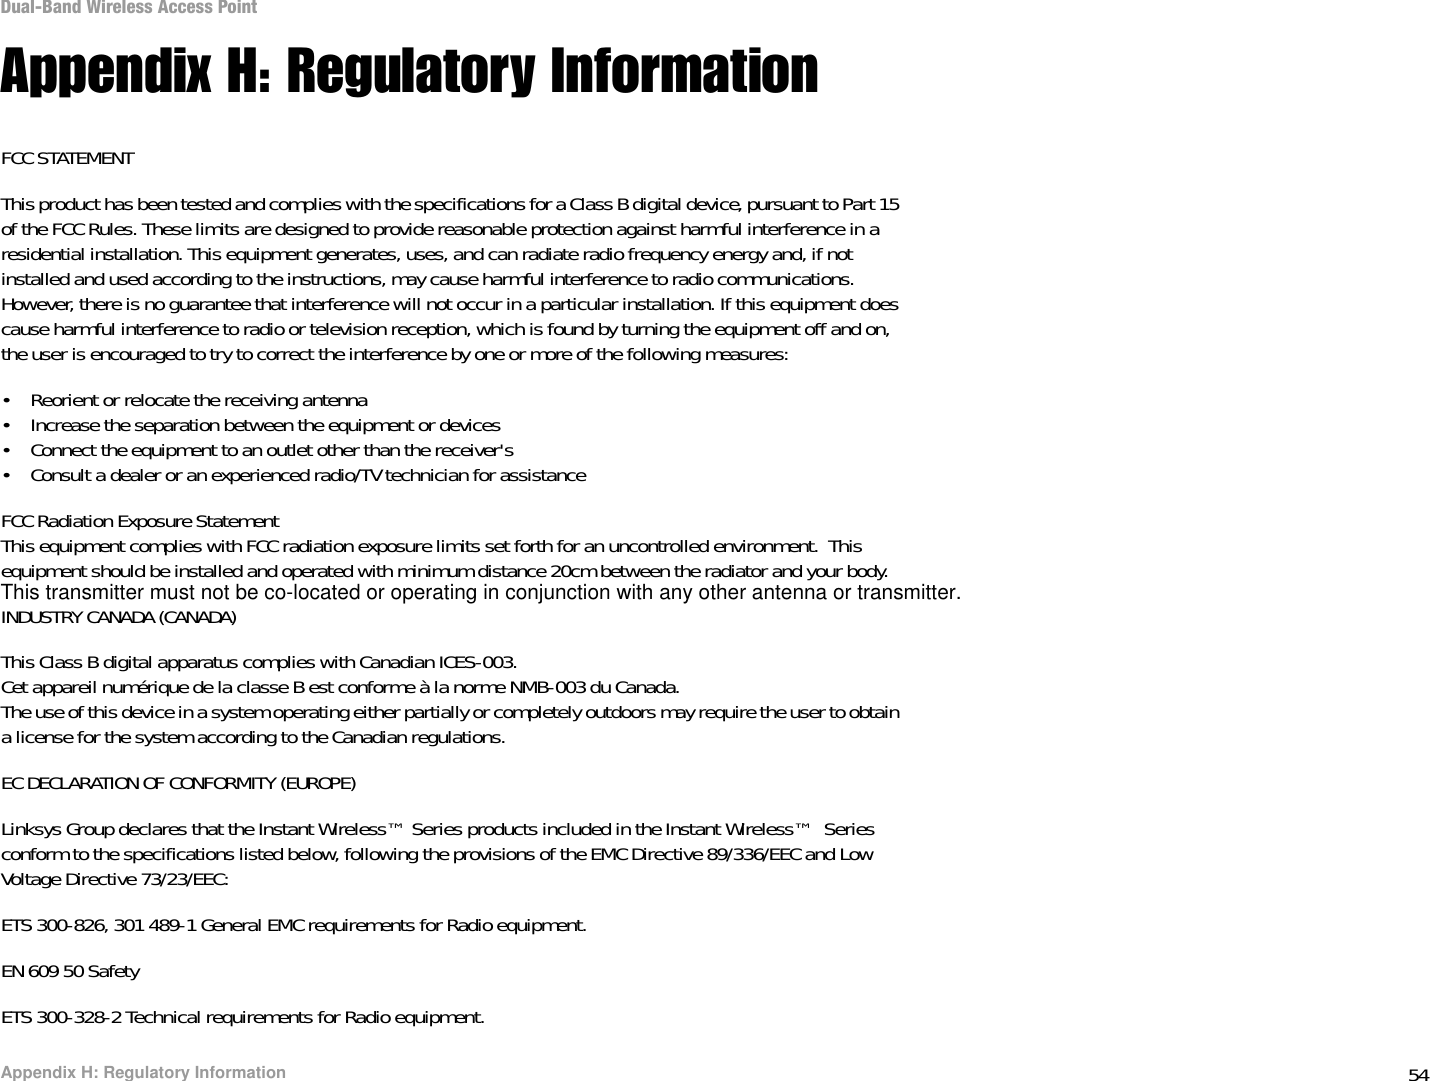 54Appendix H: Regulatory InformationDual-Band Wireless Access PointAppendix H: Regulatory InformationFCC STATEMENTThis product has been tested and complies with the specifications for a Class B digital device, pursuant to Part 15 of the FCC Rules. These limits are designed to provide reasonable protection against harmful interference in a residential installation. This equipment generates, uses, and can radiate radio frequency energy and, if not installed and used according to the instructions, may cause harmful interference to radio communications. However, there is no guarantee that interference will not occur in a particular installation. If this equipment does cause harmful interference to radio or television reception, which is found by turning the equipment off and on, the user is encouraged to try to correct the interference by one or more of the following measures:• Reorient or relocate the receiving antenna• Increase the separation between the equipment or devices• Connect the equipment to an outlet other than the receiver&apos;s• Consult a dealer or an experienced radio/TV technician for assistanceFCC Radiation Exposure StatementThis equipment complies with FCC radiation exposure limits set forth for an uncontrolled environment.  This equipment should be installed and operated with minimum distance 20cm between the radiator and your body.INDUSTRY CANADA (CANADA)This Class B digital apparatus complies with Canadian ICES-003.Cet appareil numérique de la classe B est conforme à la norme NMB-003 du Canada.The use of this device in a system operating either partially or completely outdoors may require the user to obtain a license for the system according to the Canadian regulations.EC DECLARATION OF CONFORMITY (EUROPE)Linksys Group declares that the Instant Wireless™ Series products included in the Instant Wireless™  Series conform to the specifications listed below, following the provisions of the EMC Directive 89/336/EEC and Low Voltage Directive 73/23/EEC:ETS 300-826, 301 489-1 General EMC requirements for Radio equipment.EN 609 50 SafetyETS 300-328-2 Technical requirements for Radio equipment.This transmitter must not be co-located or operating in conjunction with any other antenna or transmitter.